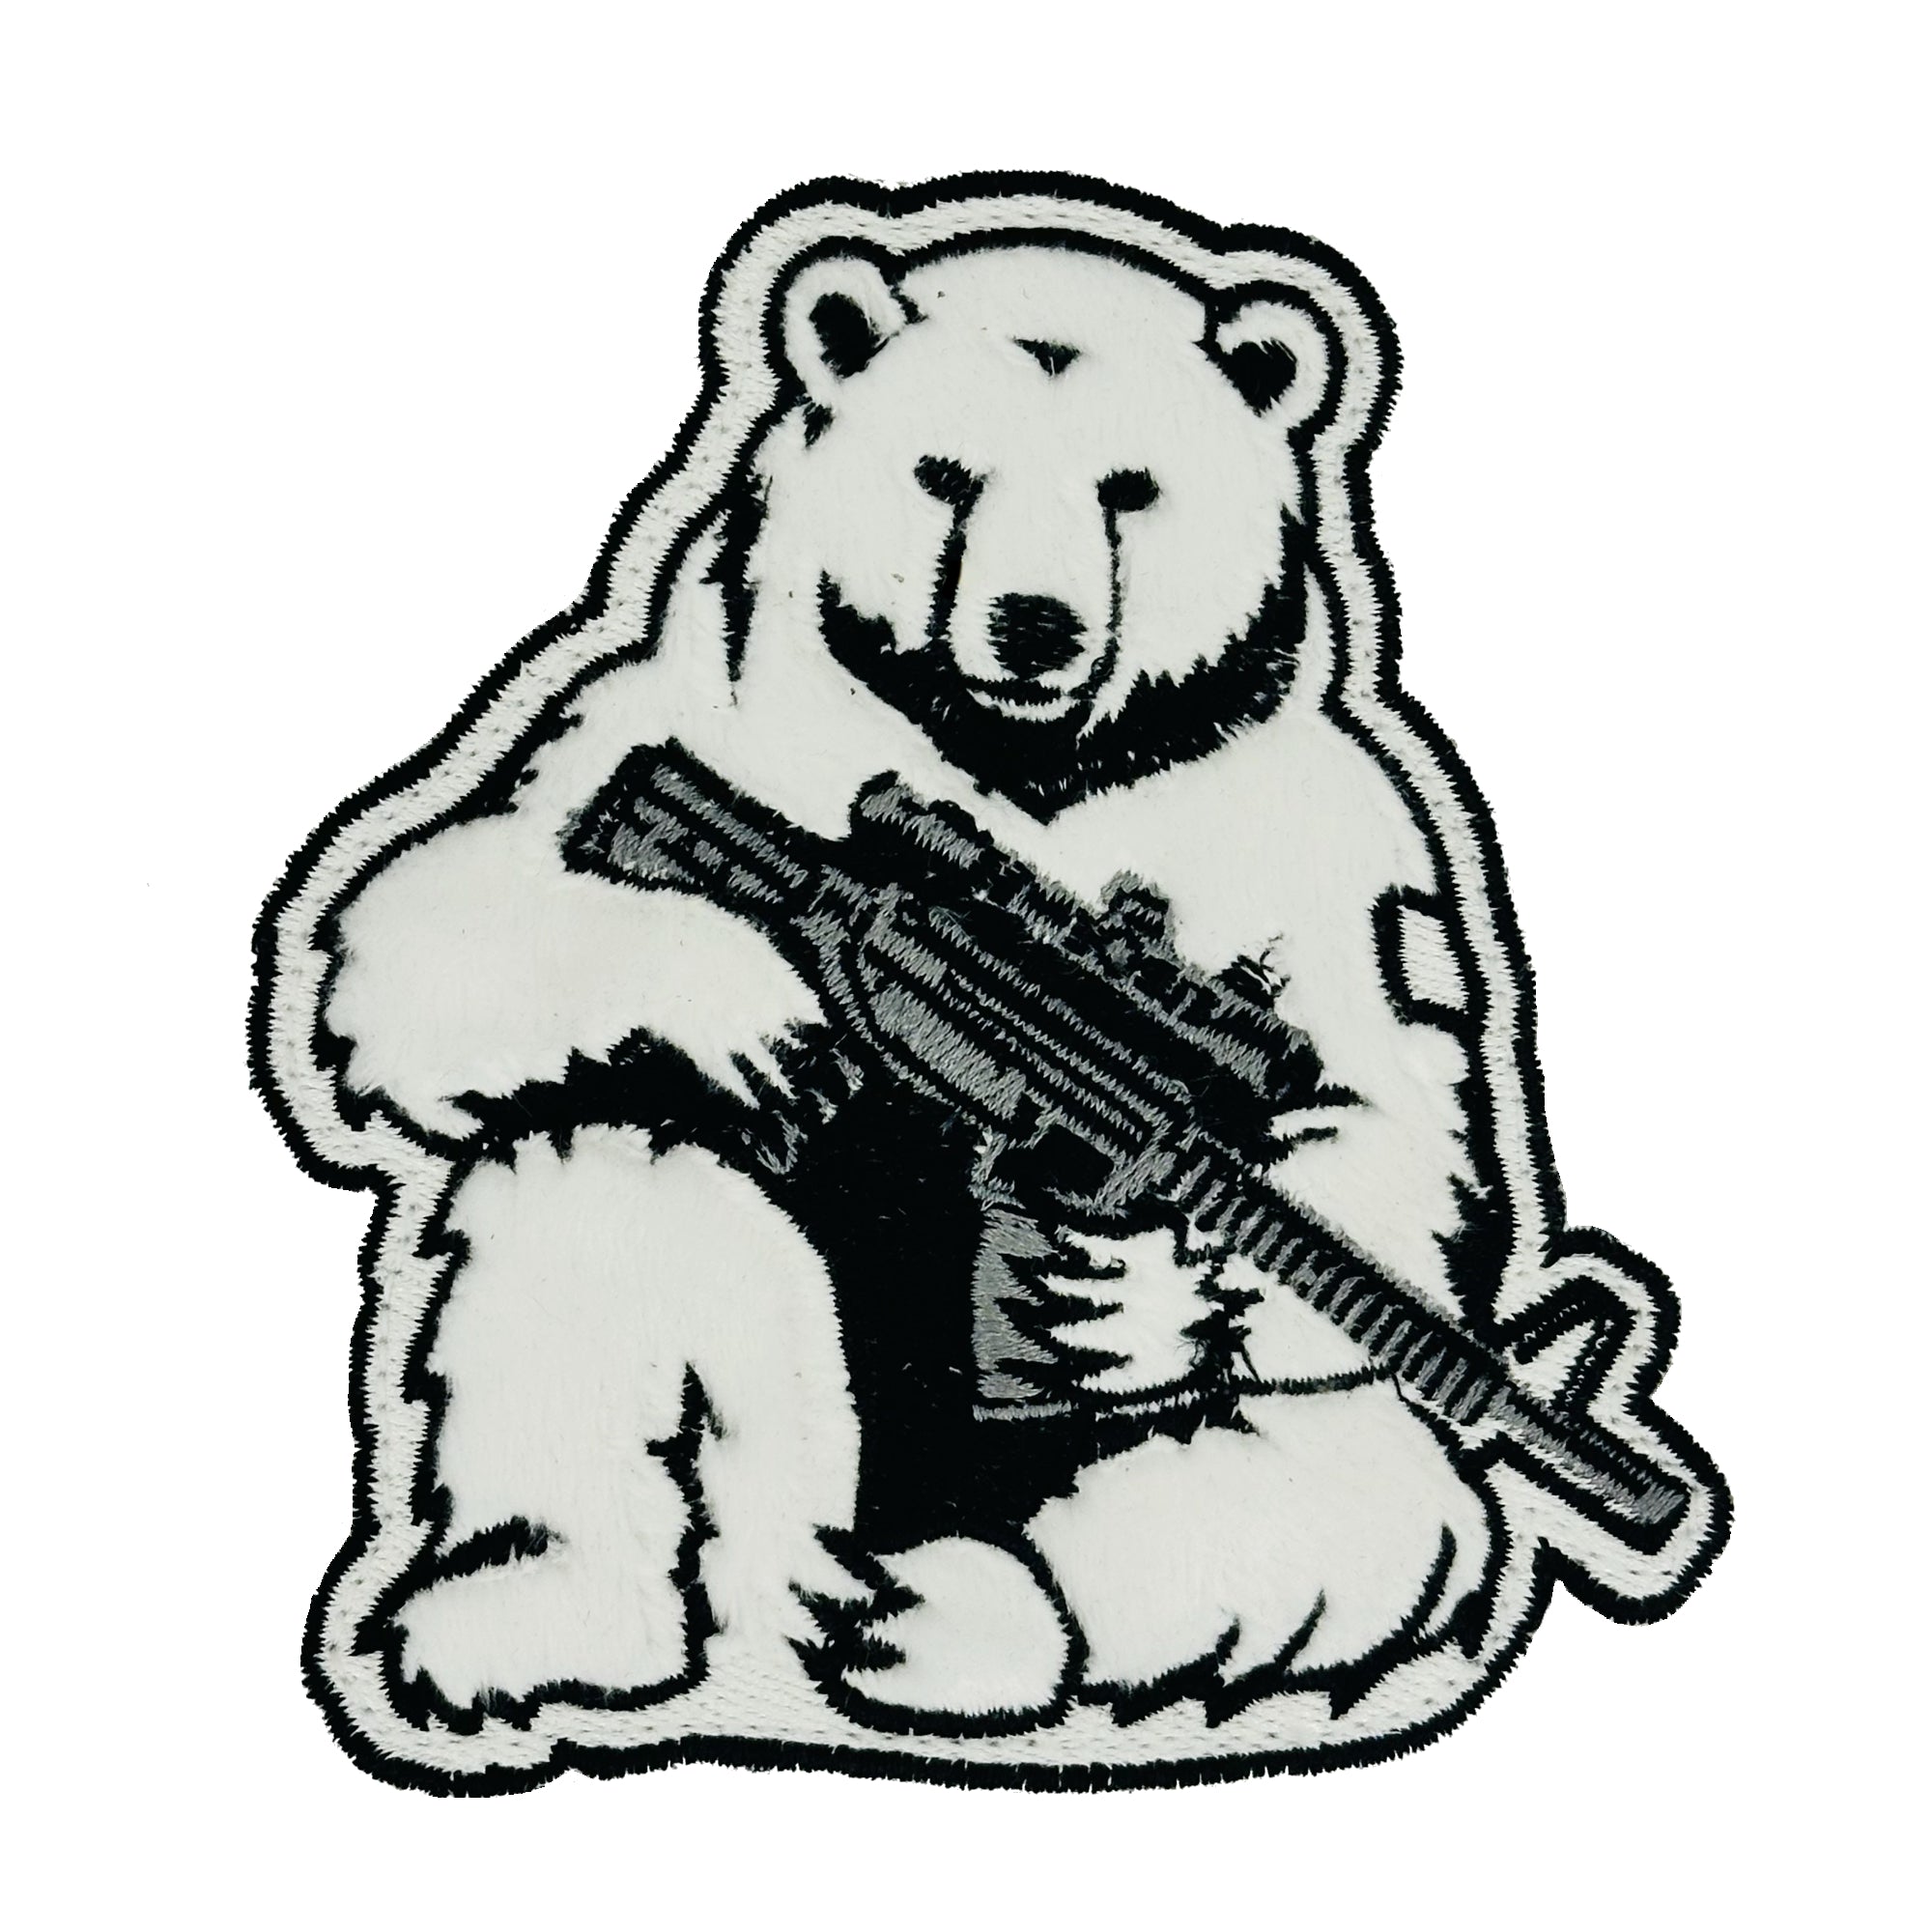 Deploying Fluff and Tough: The Tactical Polar Bear Patch – Where Furry Meets Fury!